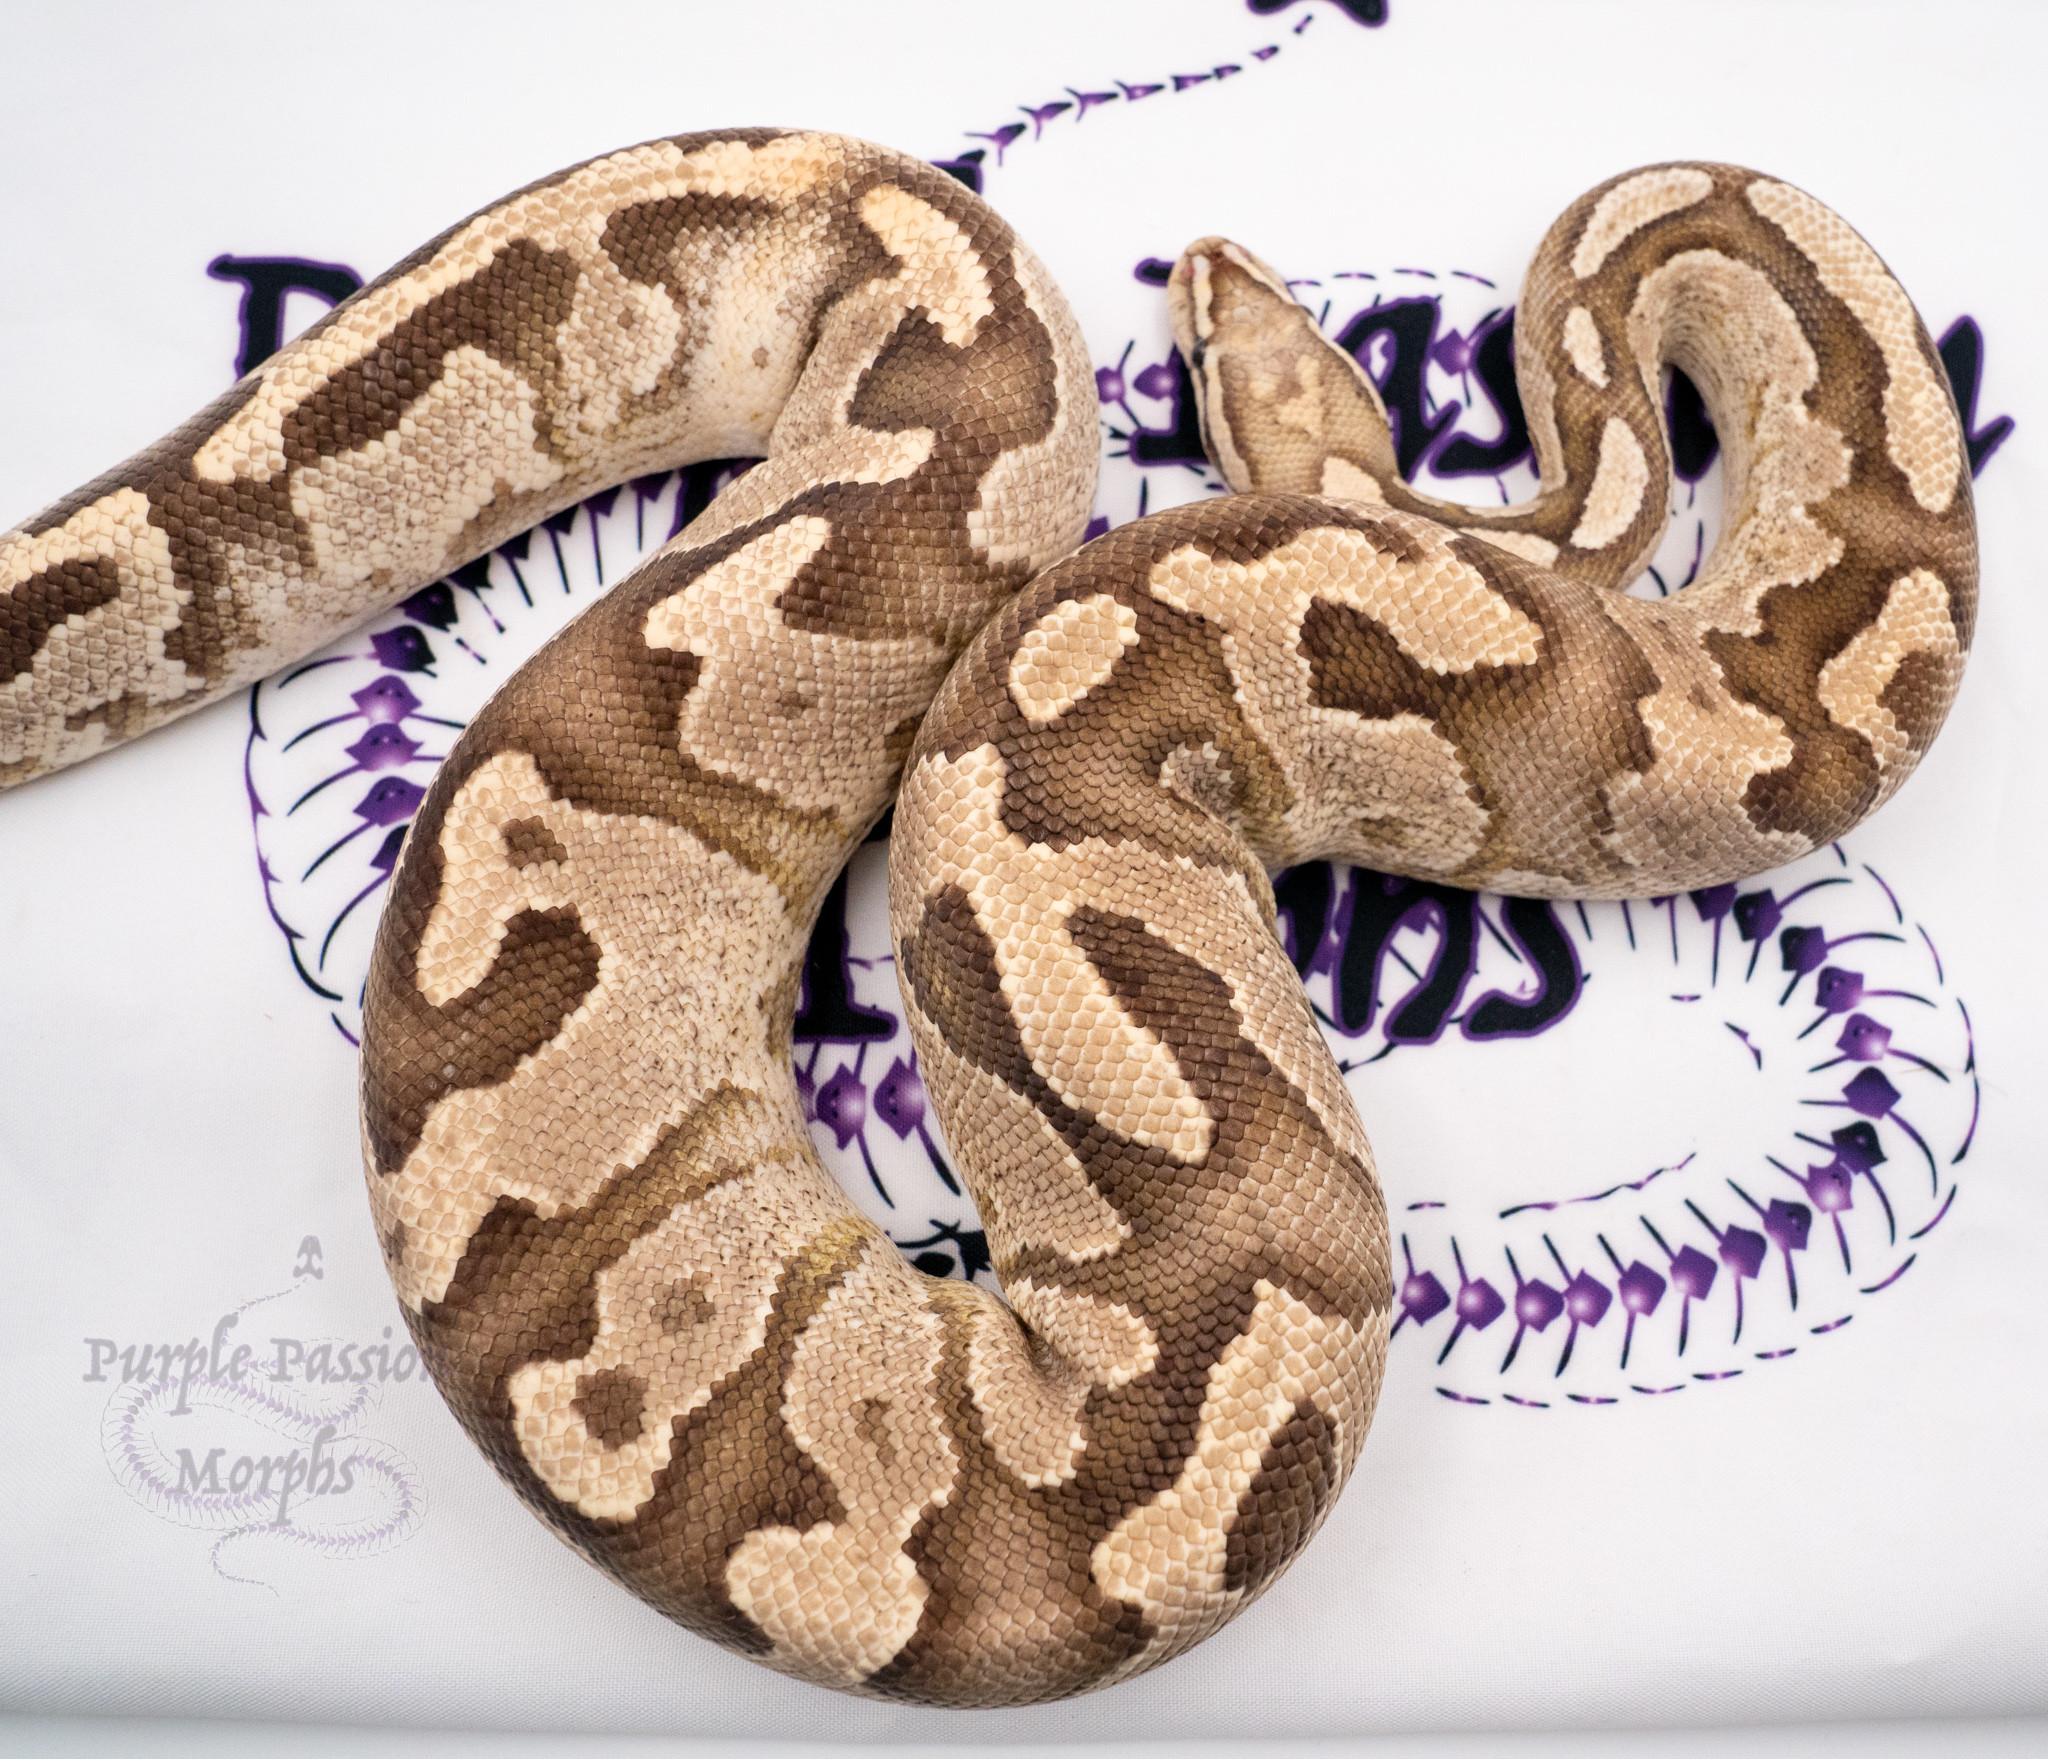 Super Disco Proven Breeder Male Ball Python by PurplePassion Morphs